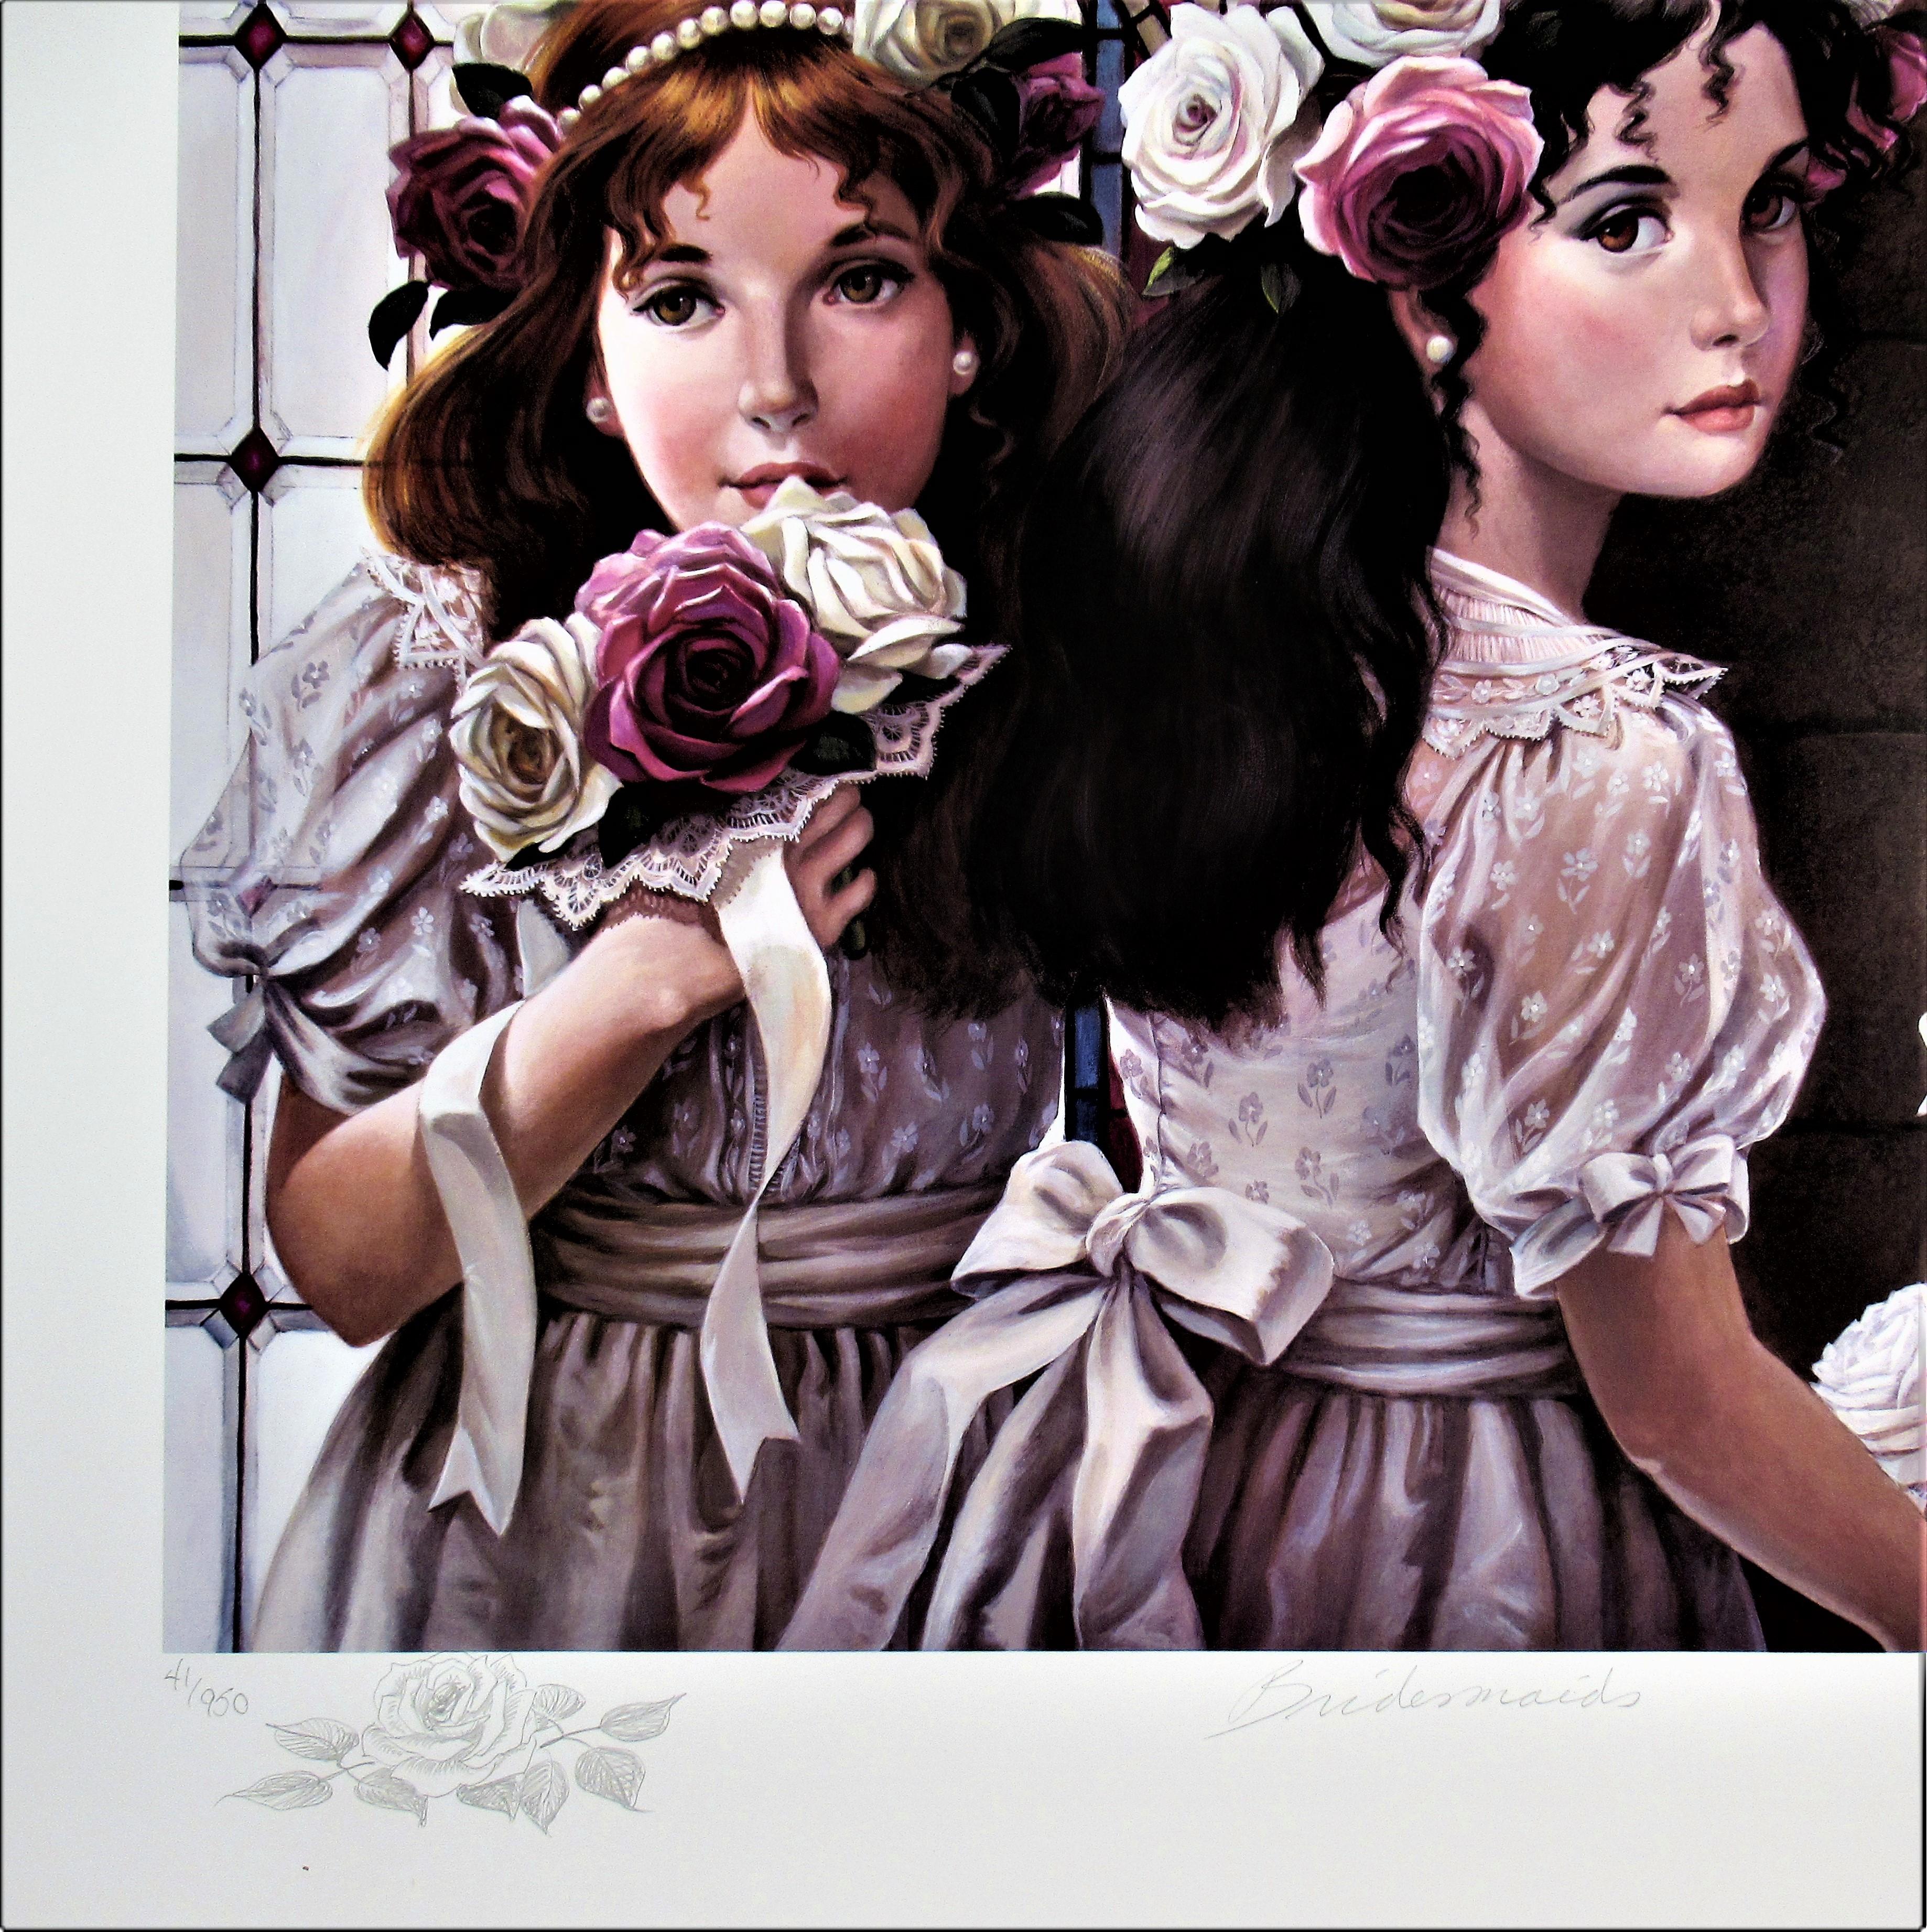 Bridesmaids - Romantic Print by Pati Bannister